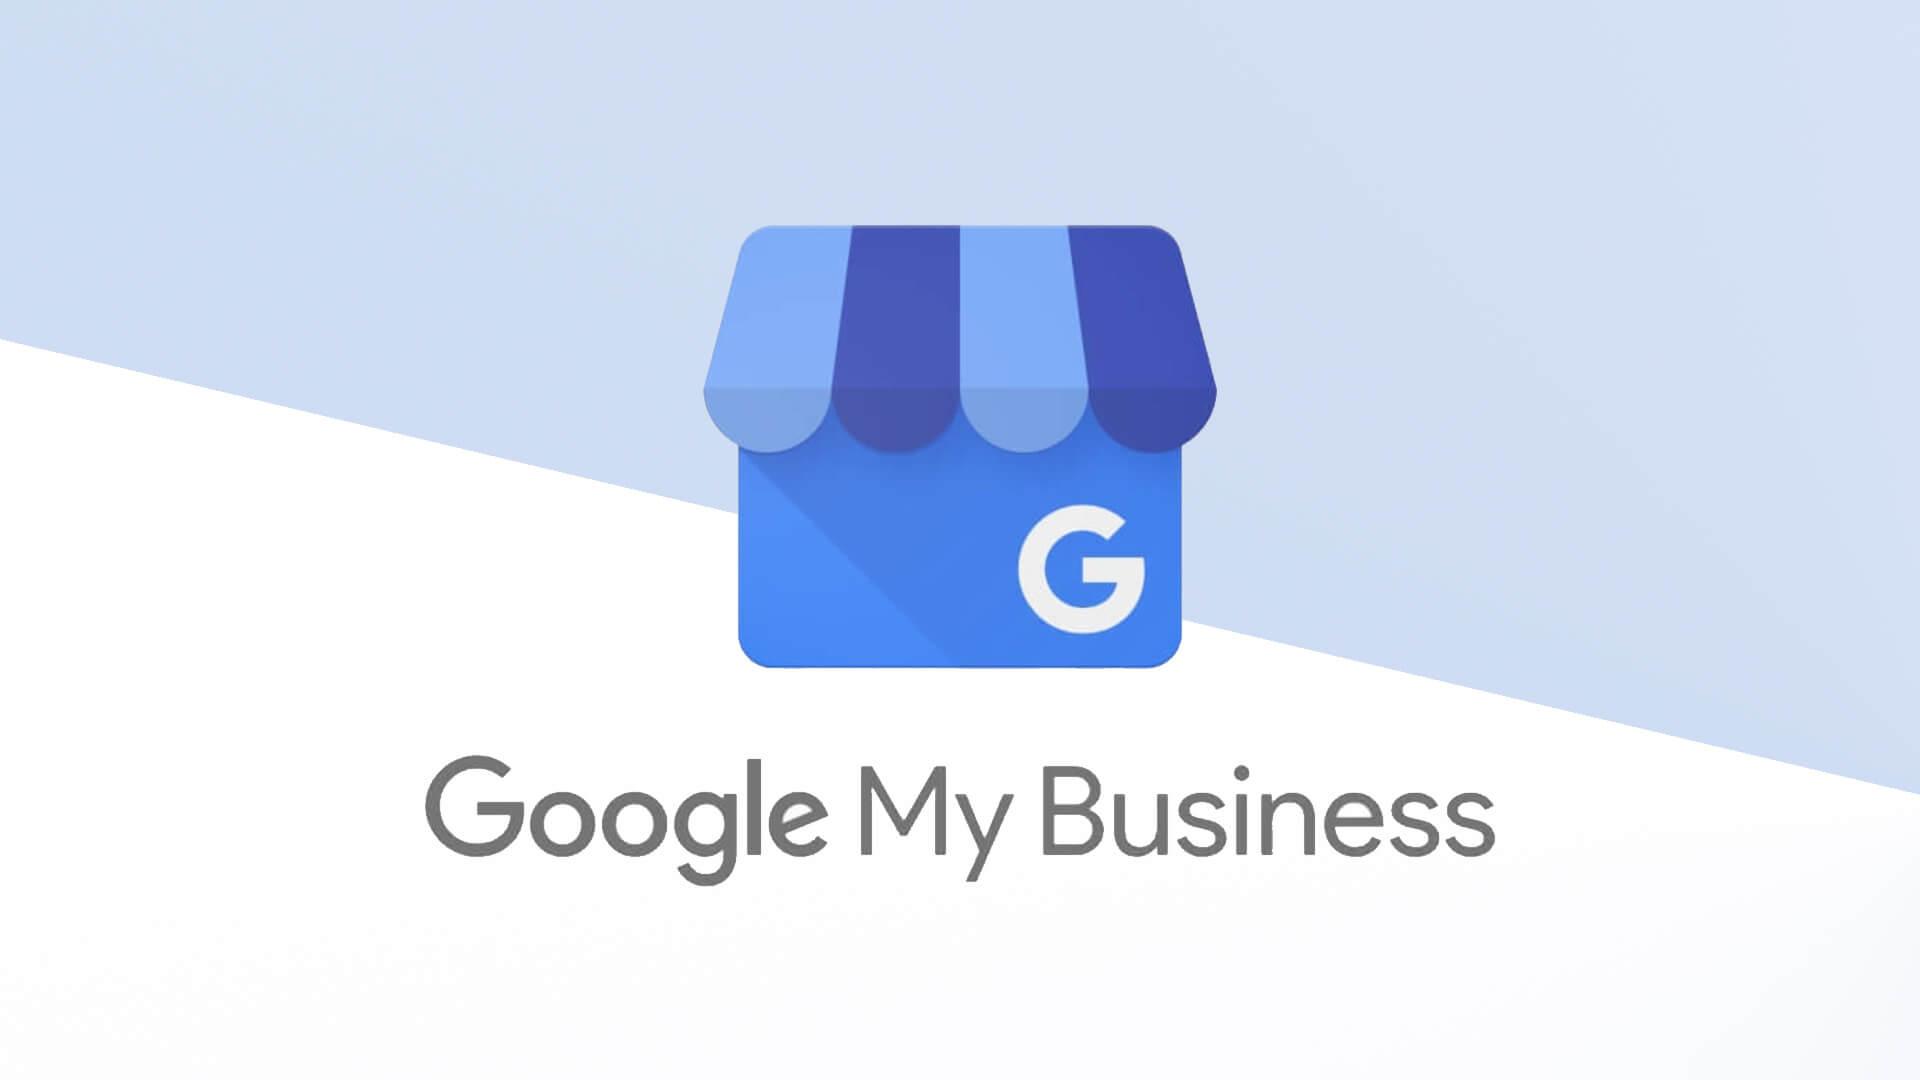 GMB Logo - Google My Business adds more branding tools, introduces searchable